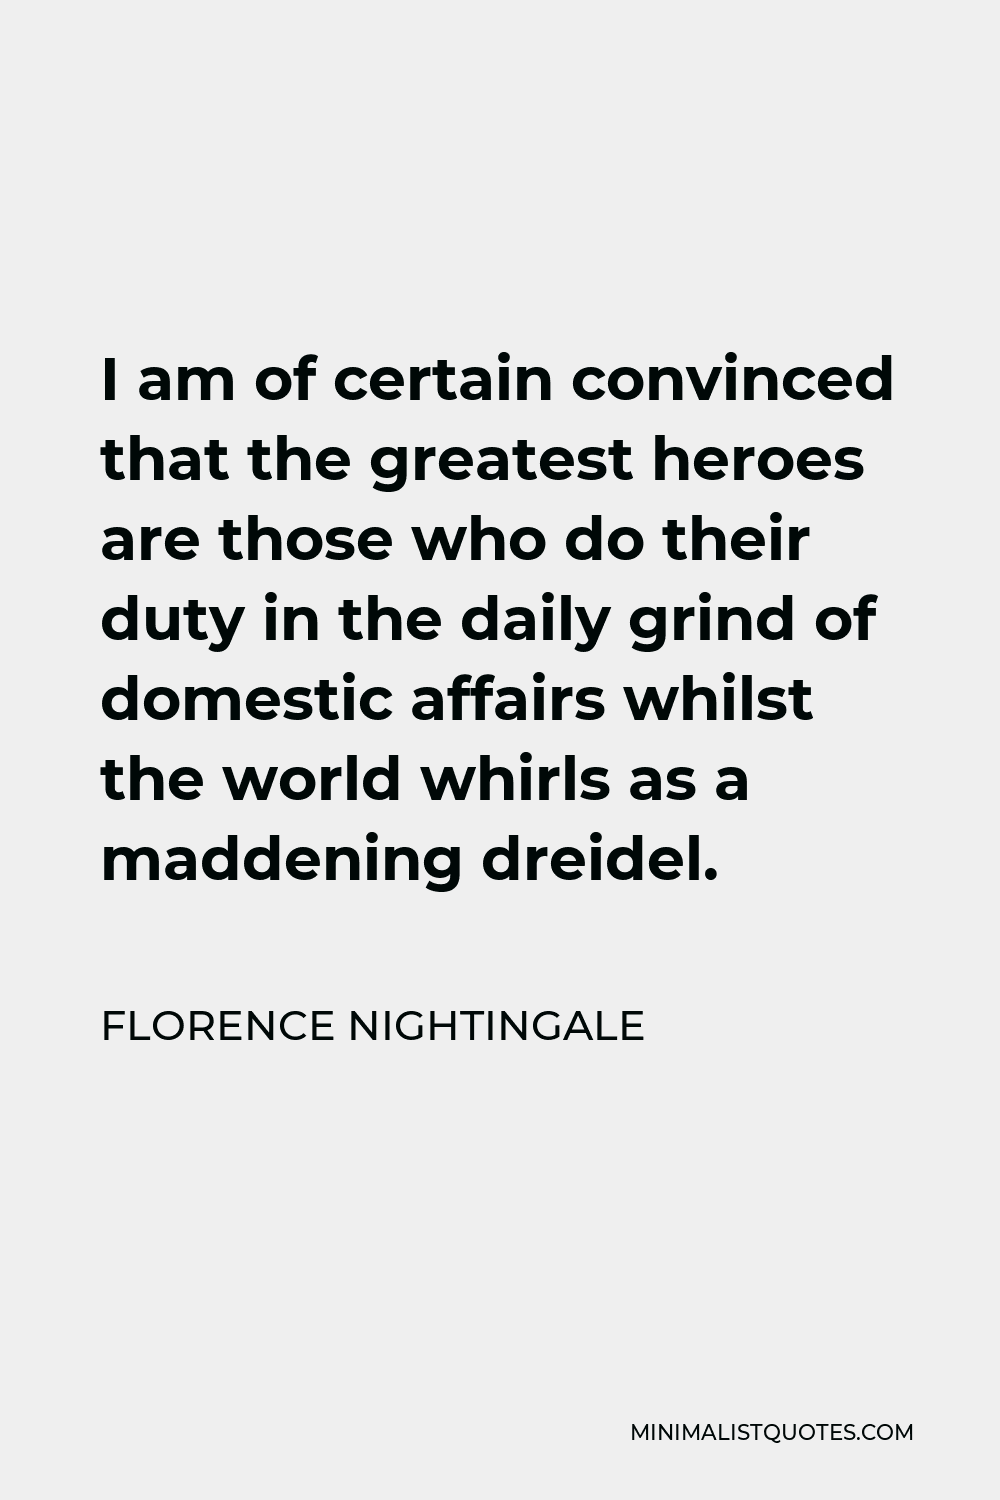 Florence Nightingale Quote - I am of certain convinced that the greatest heroes are those who do their duty in the daily grind of domestic affairs whilst the world whirls as a maddening dreidel.